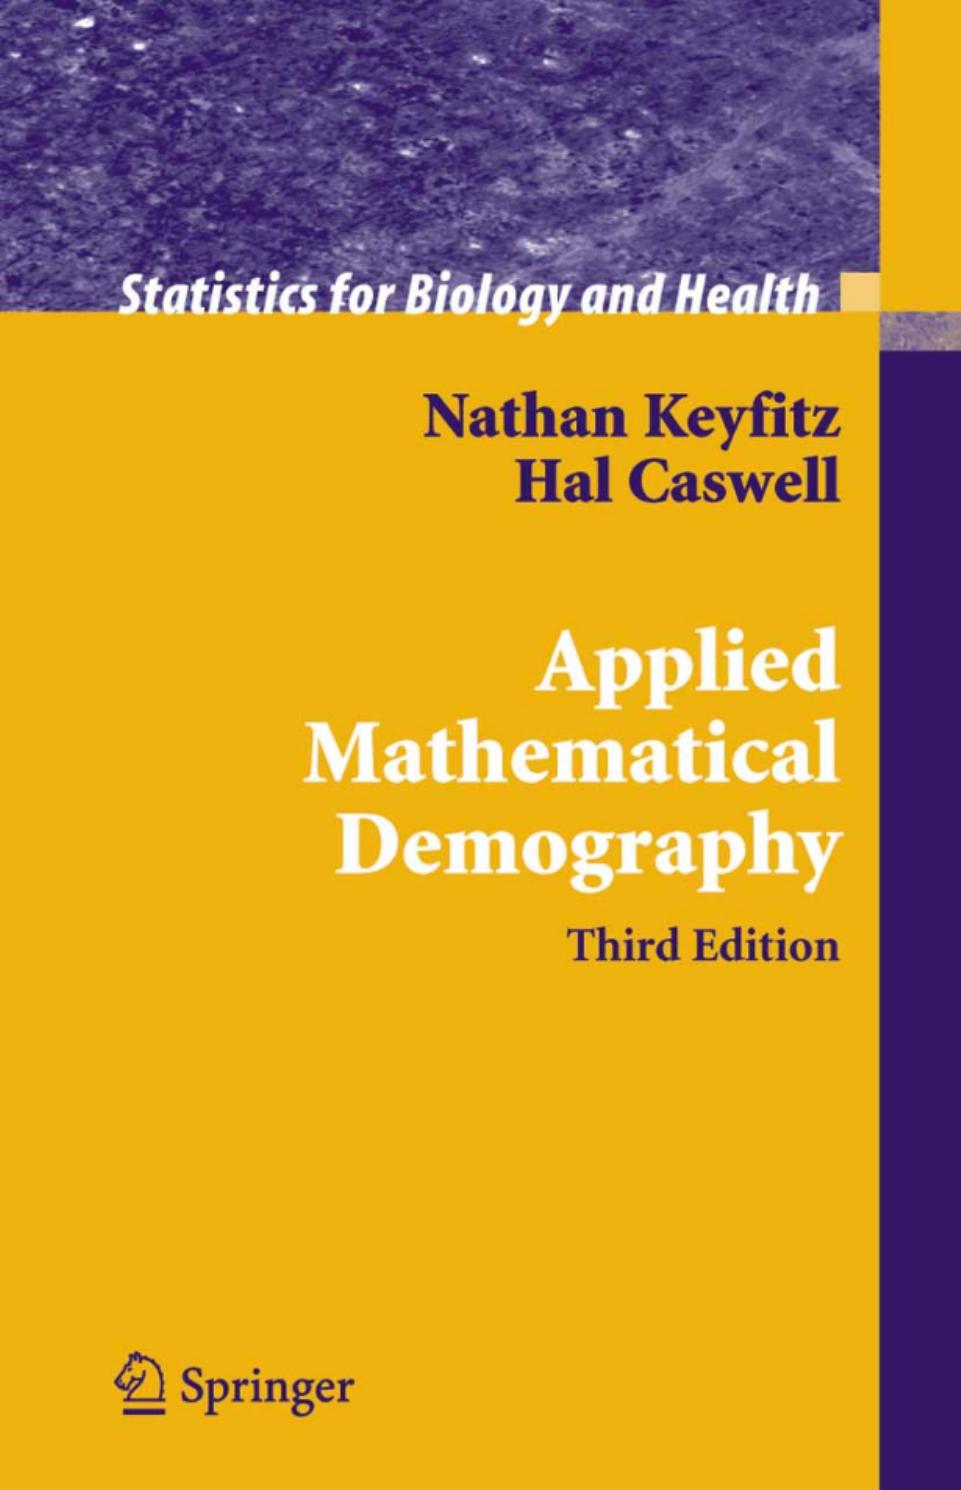 Applied Mathematical Demography, 3rd ed. (Statistics for Biology and Health)